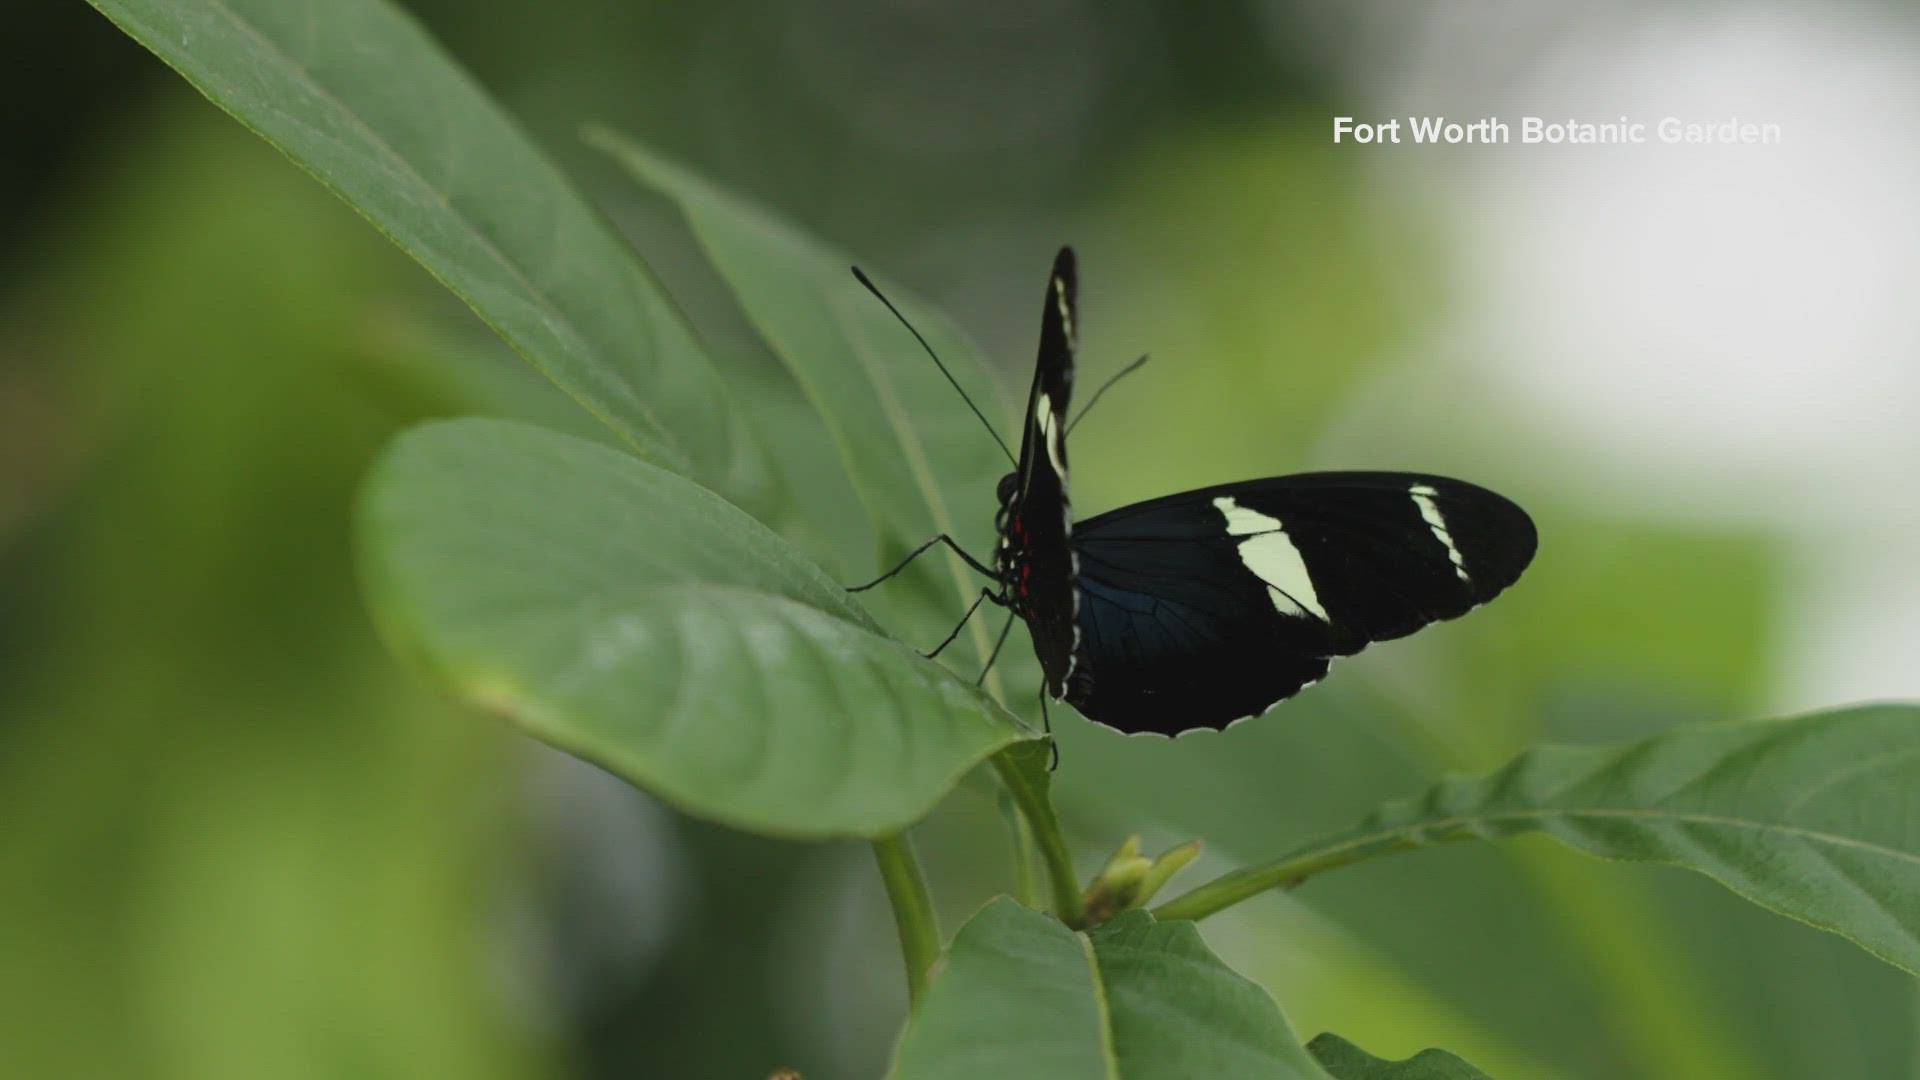 Get out and see the butterflies at the Fort Worth Botanic Gardens while you can!